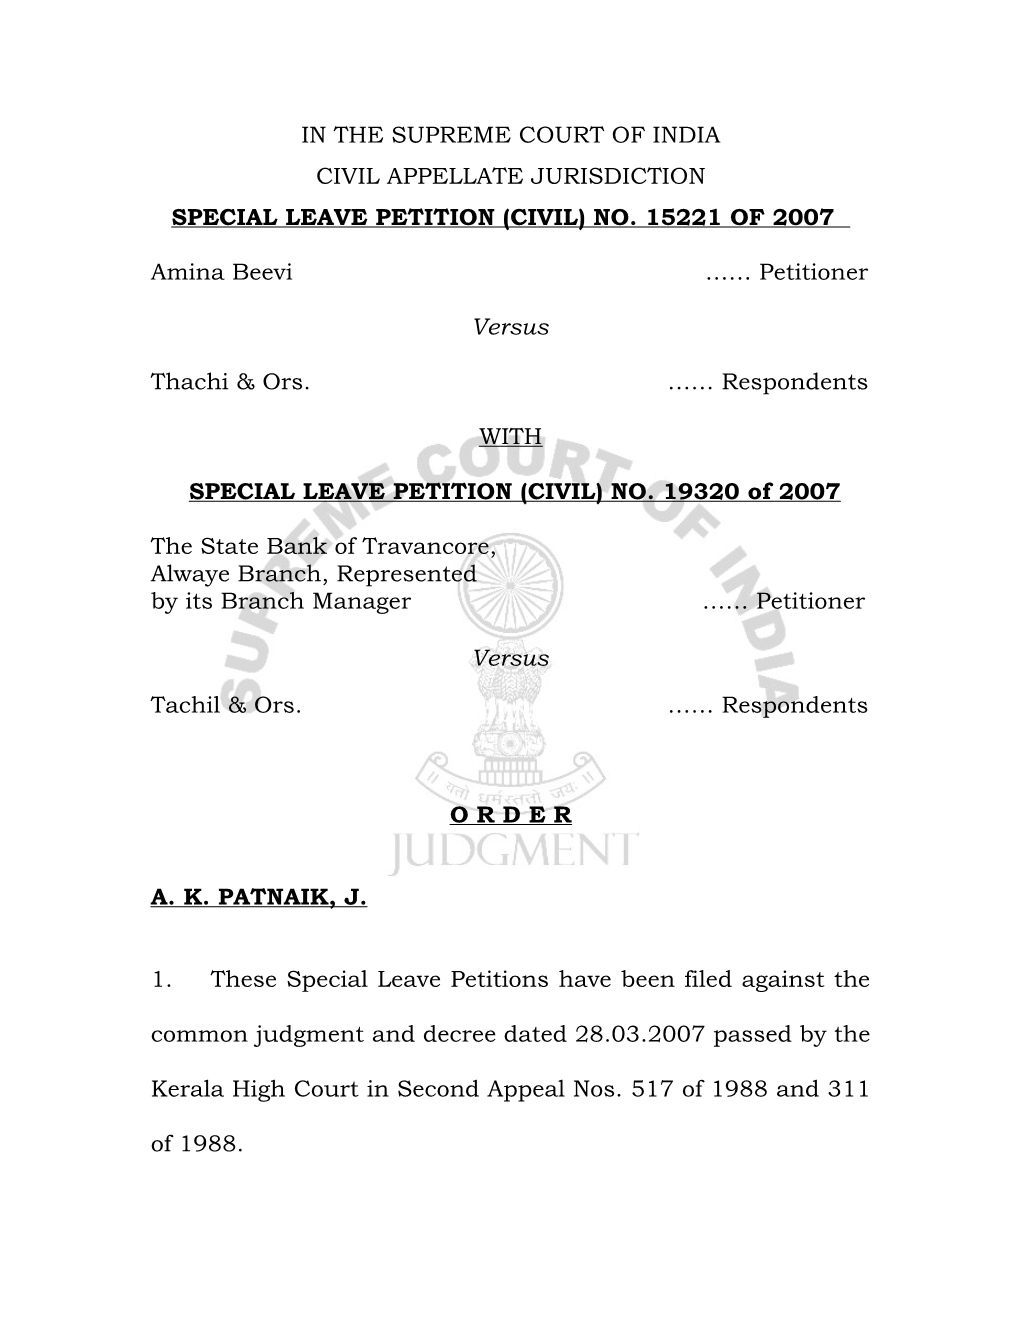 In the Supreme Court of India Civil Appellate Jurisdiction Special Leave Petition (Civil) No